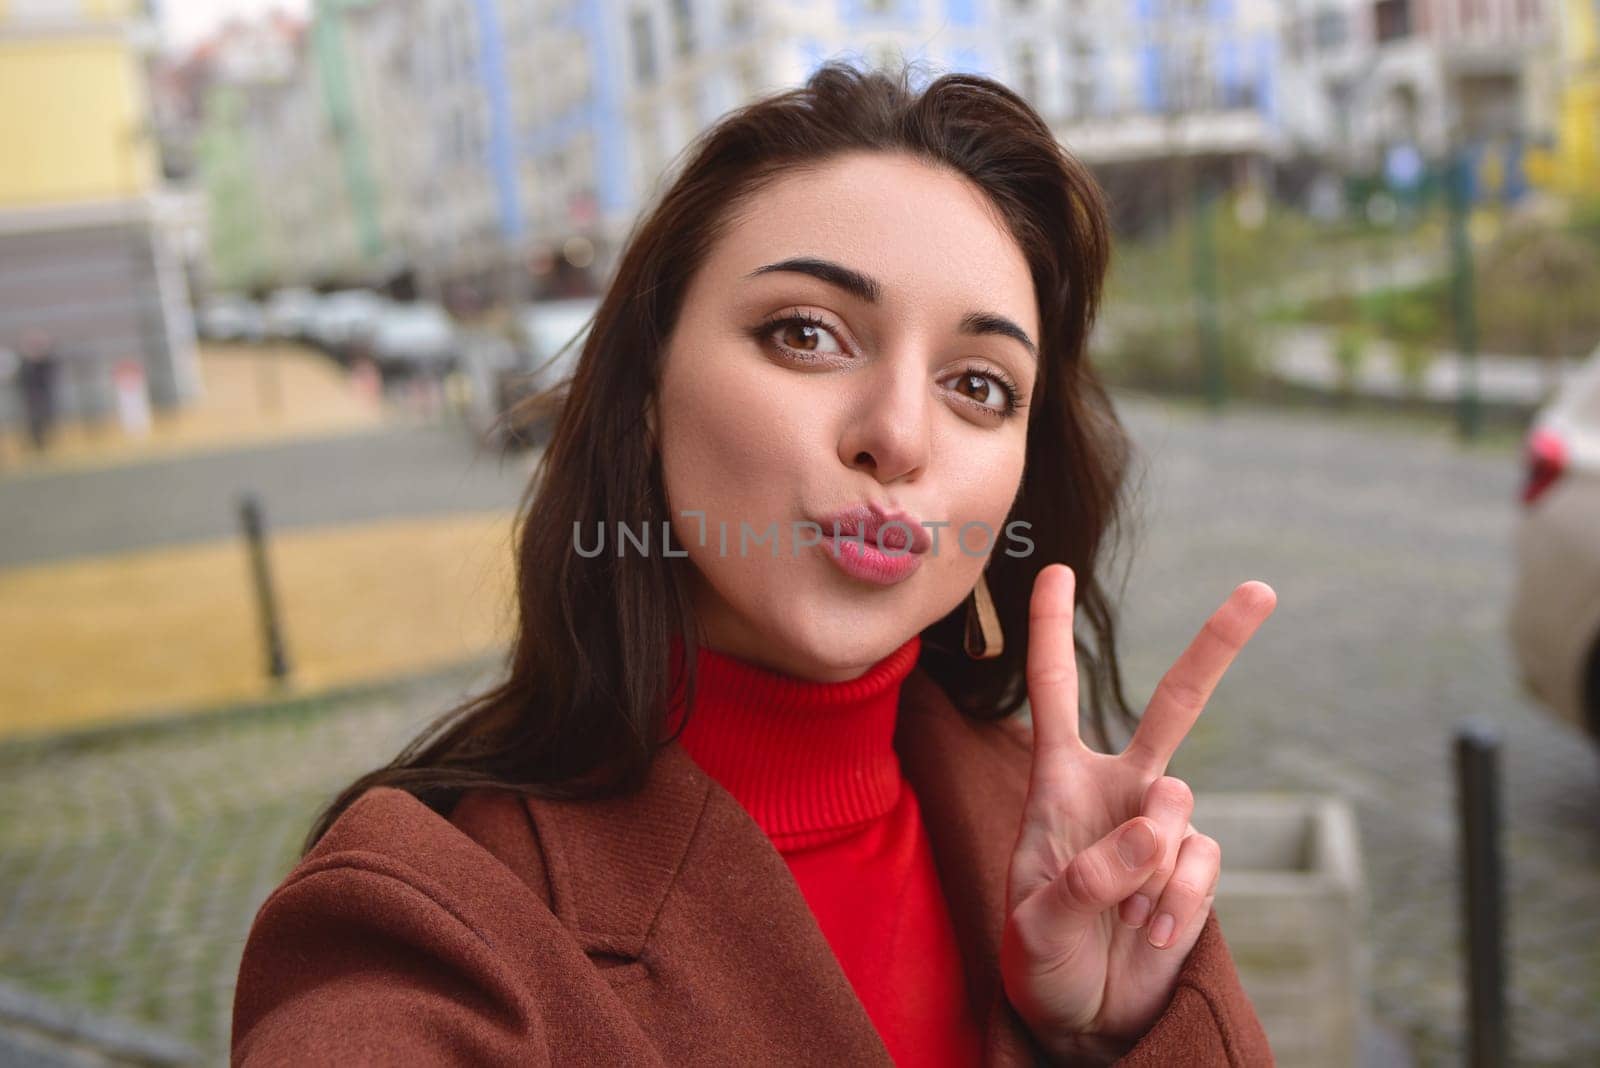 Charming lady in a brown autumn coat takes a selfie on the street with a peace sign by Nickstock